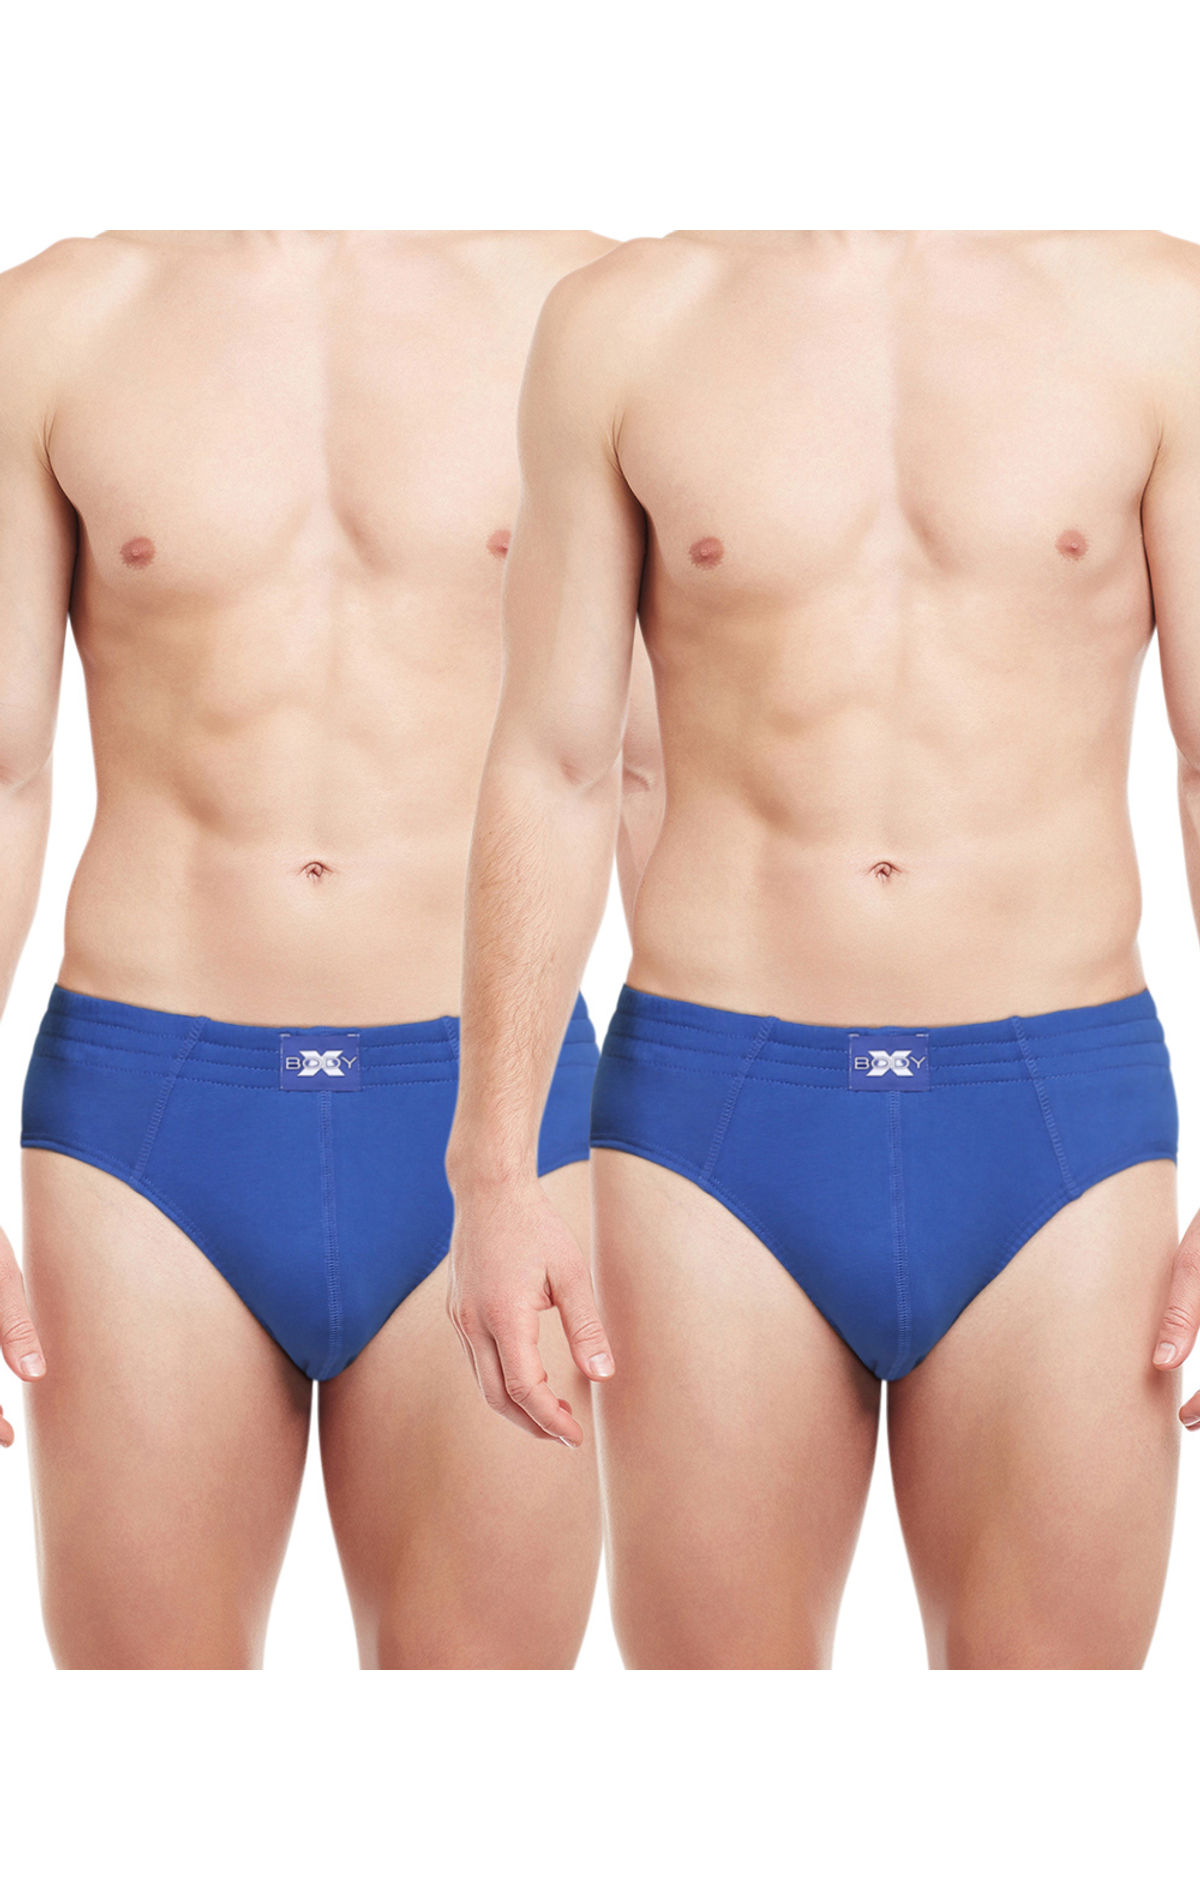 Body X Solid Briefs-pack Of 2-bx13b, Bx13b-e Blue